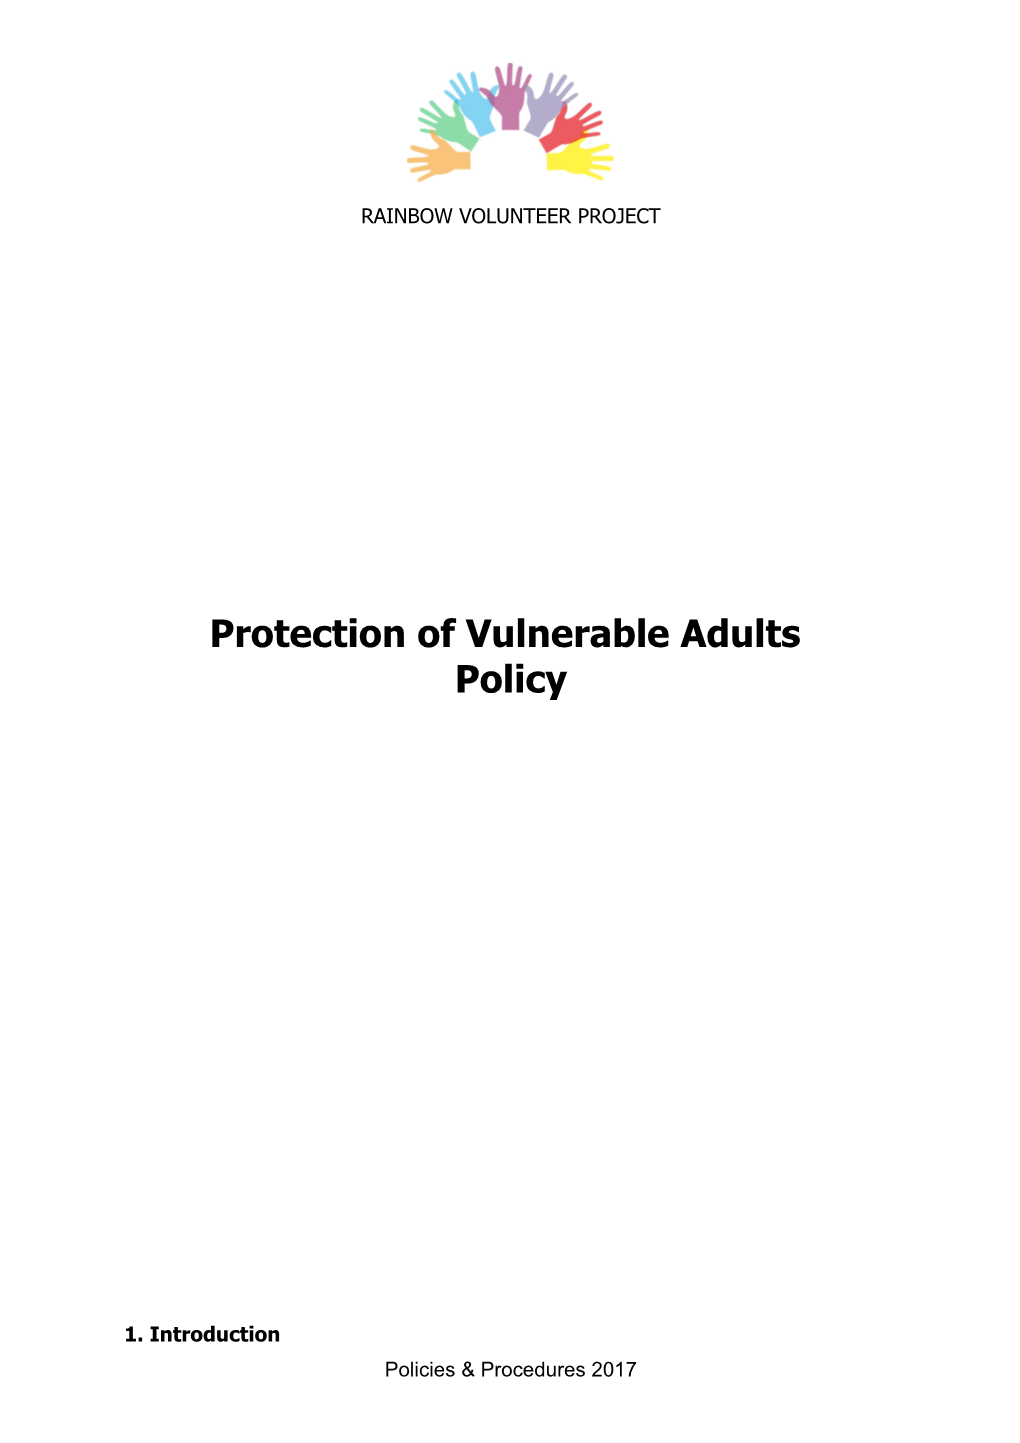 Protection of Vulnerable Adults Policy